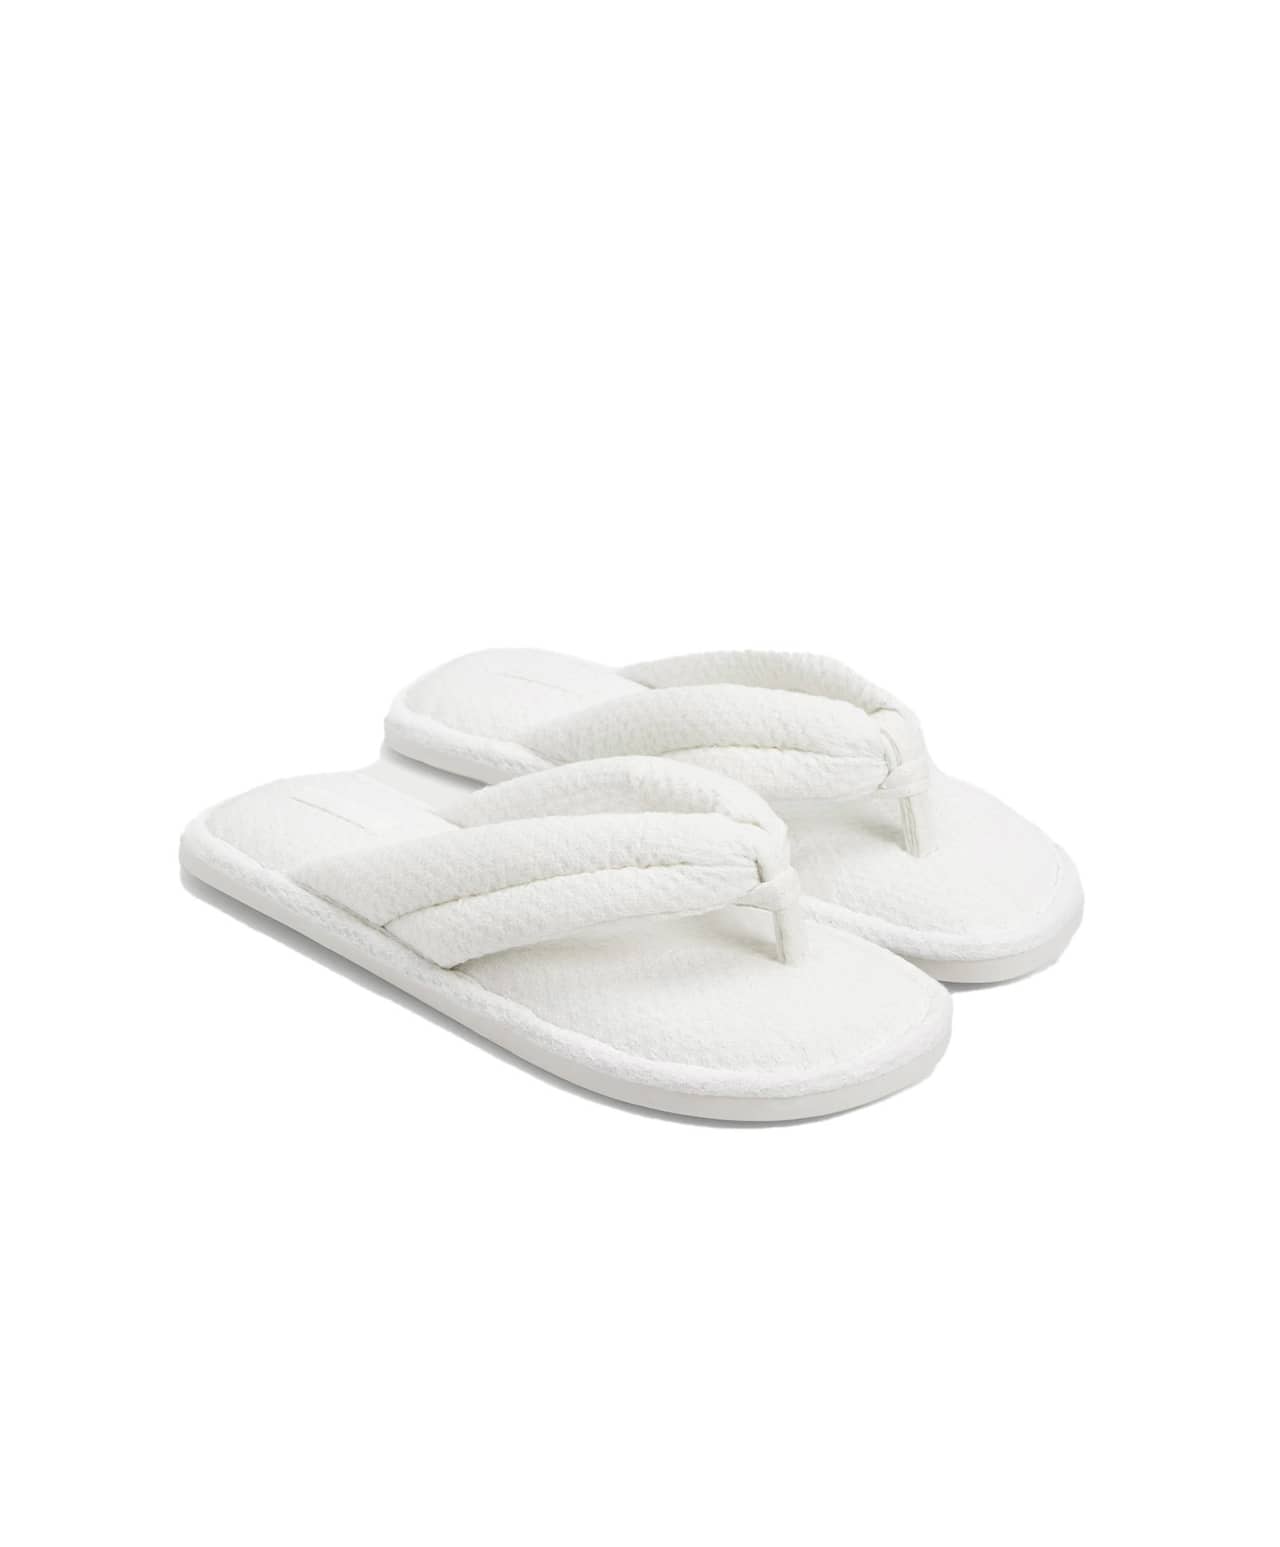 The 15 Best Slippers for Women - Buy Side from